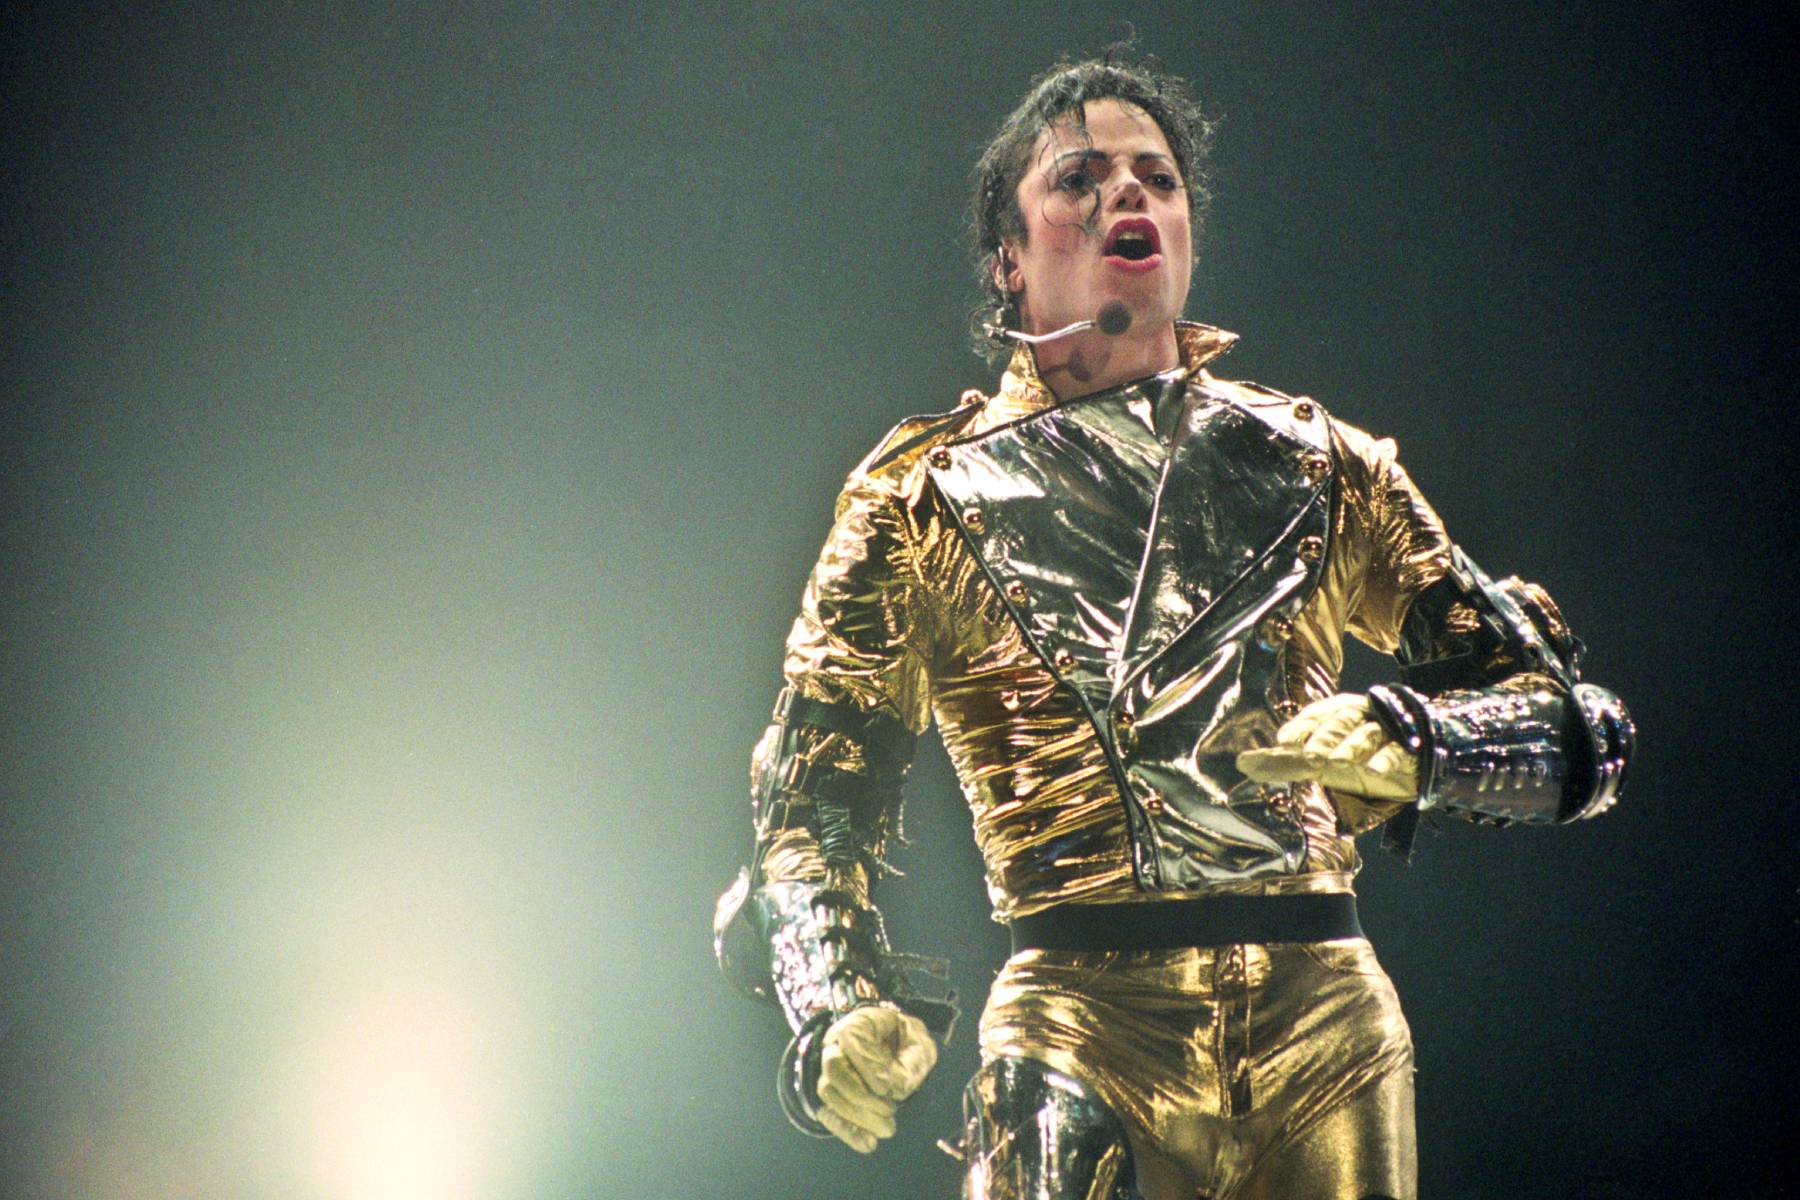 michael jackson catalog stake sold to sony, valued at whopping $1.2 billion